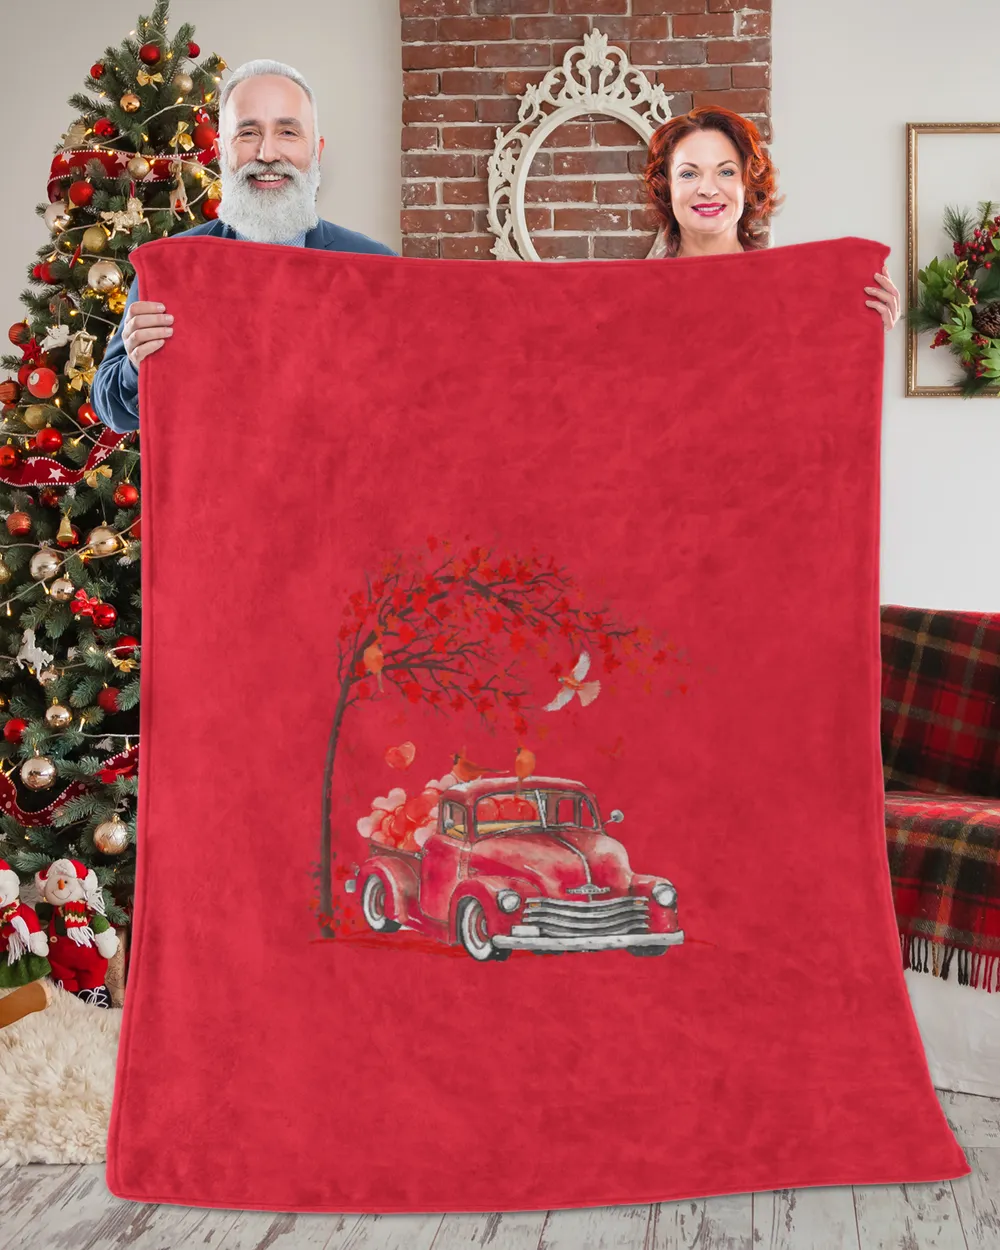 Red Truck Happy Valentines Day Cute Couple Matching T-Shirt